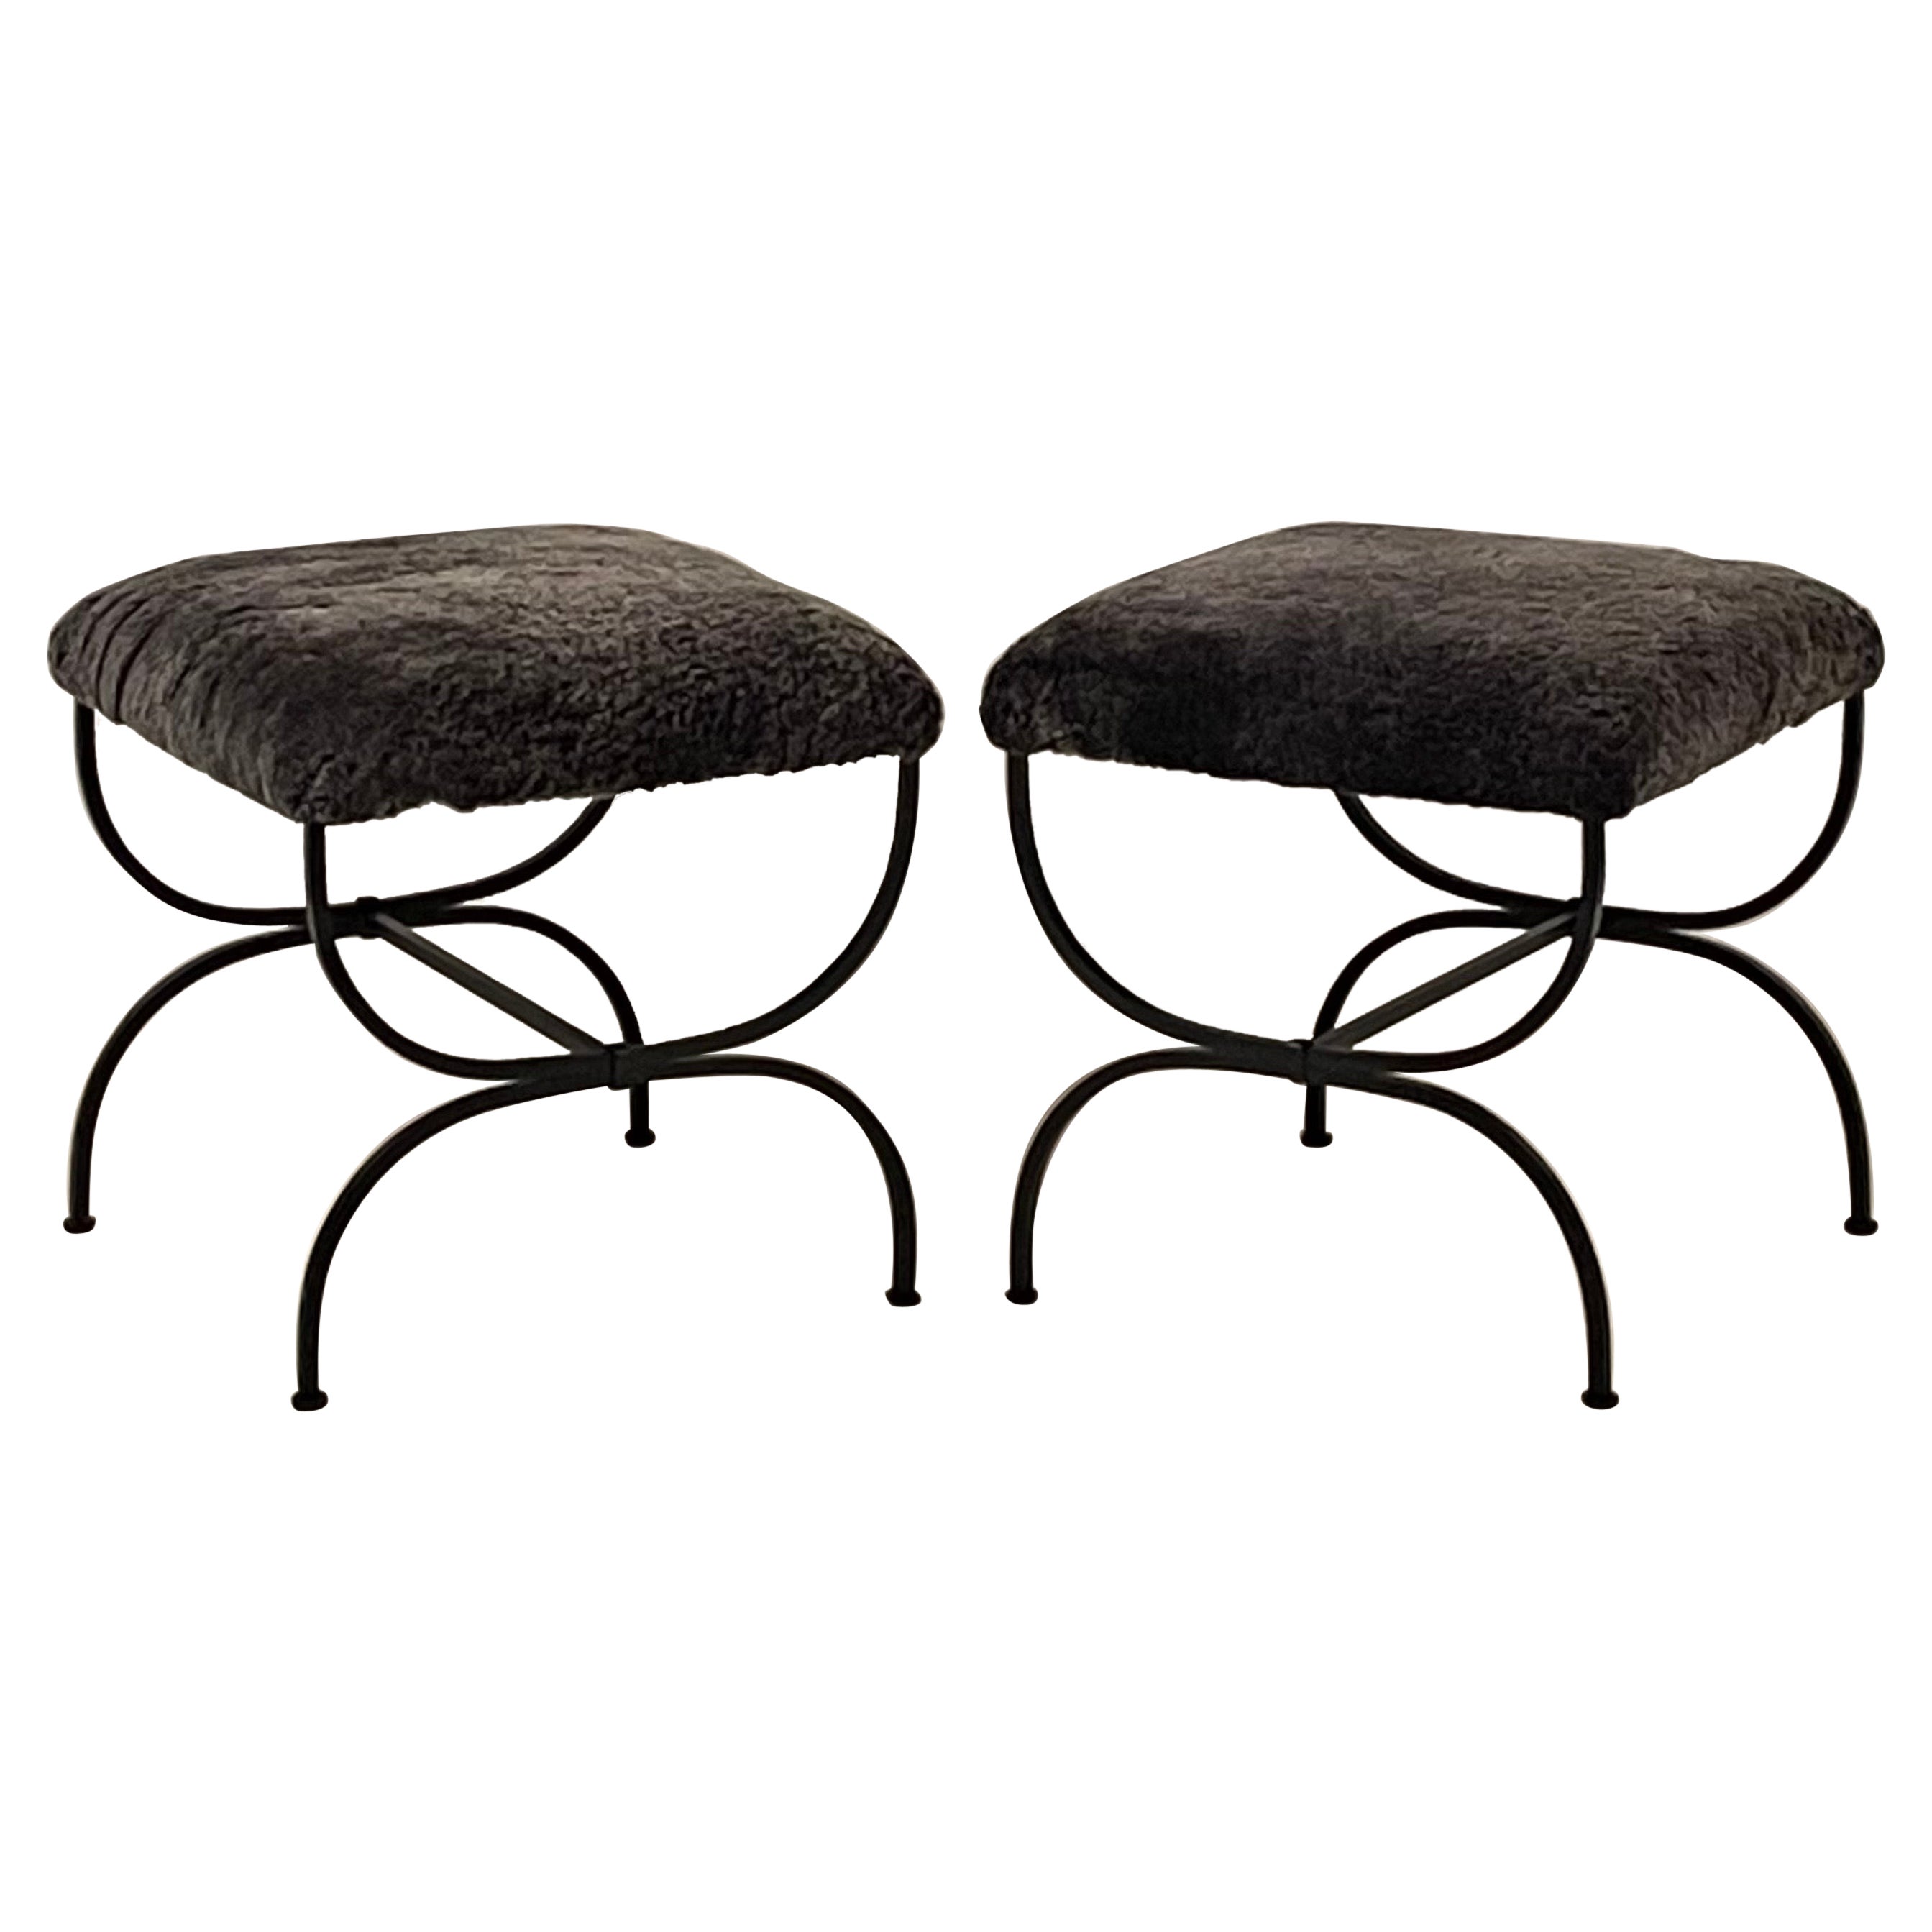 Pair of Grey Fur 'Strapontin' Stools by Design Frères